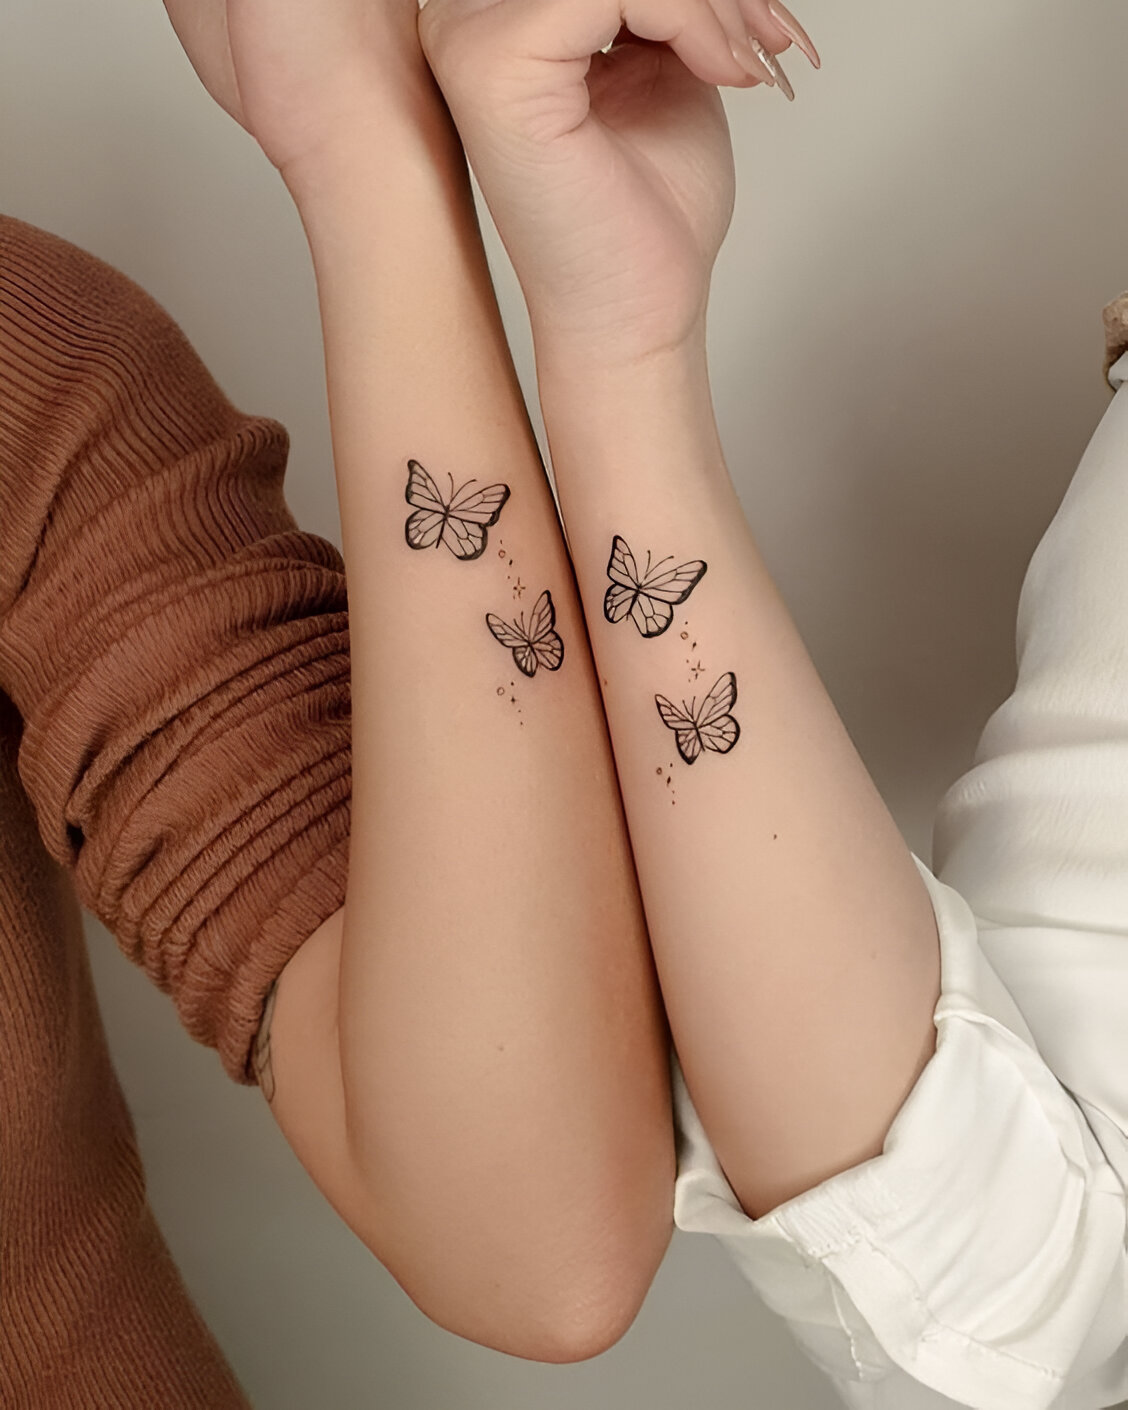 Matching Wrist Tattoos With Butterfly